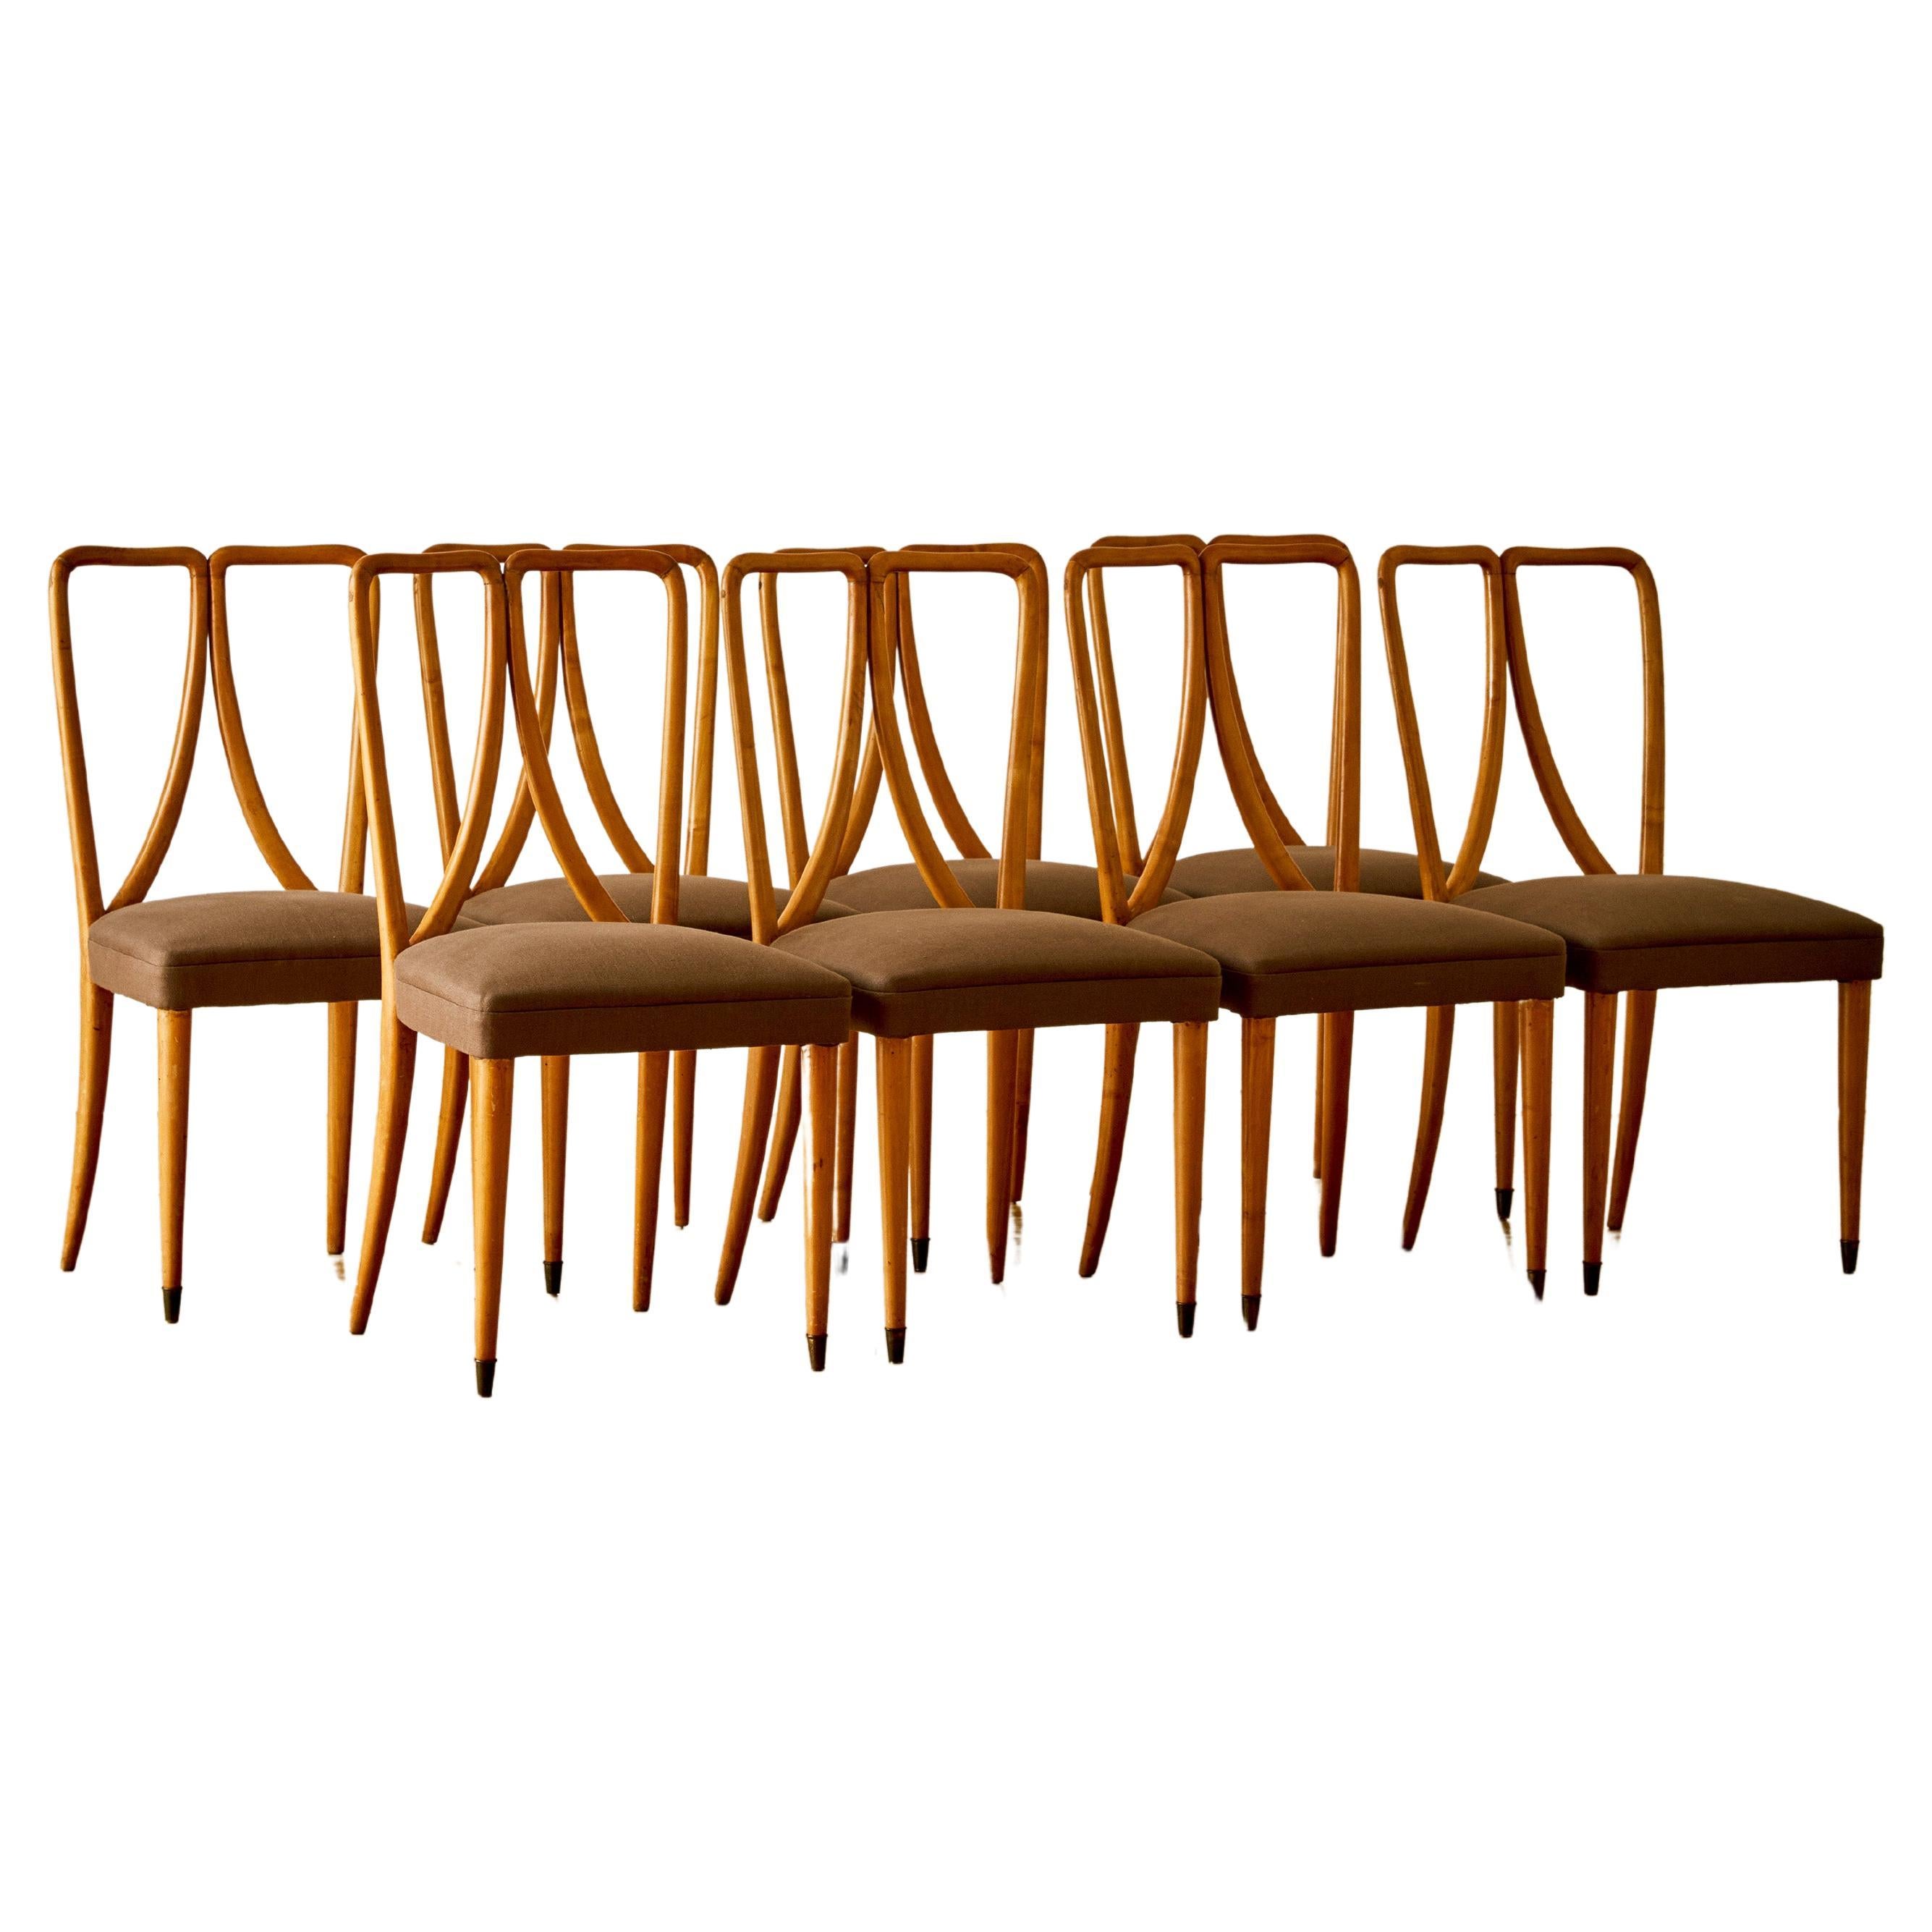  A set of 8 fruitwood dining chairs by Guglielmo Ulrich